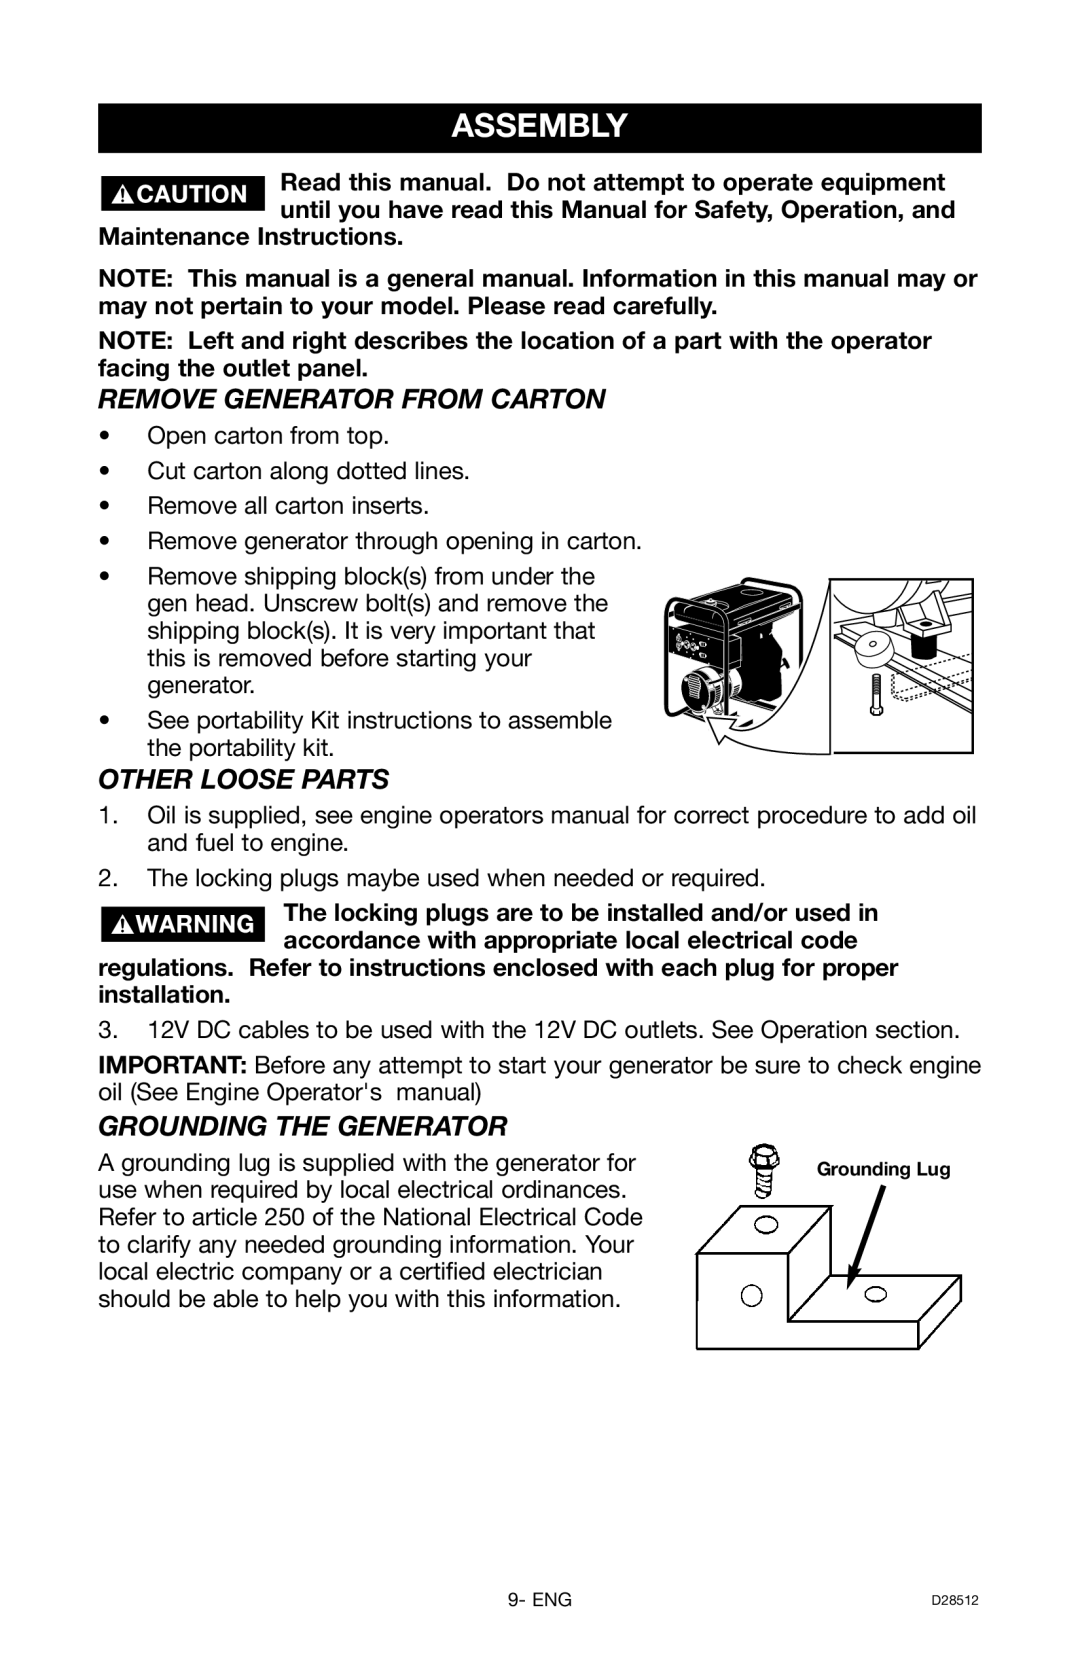 Porter-Cable H450IS instruction manual Assembly, Remove Generator From Carton, Other Loose Parts, Grounding The Generator 